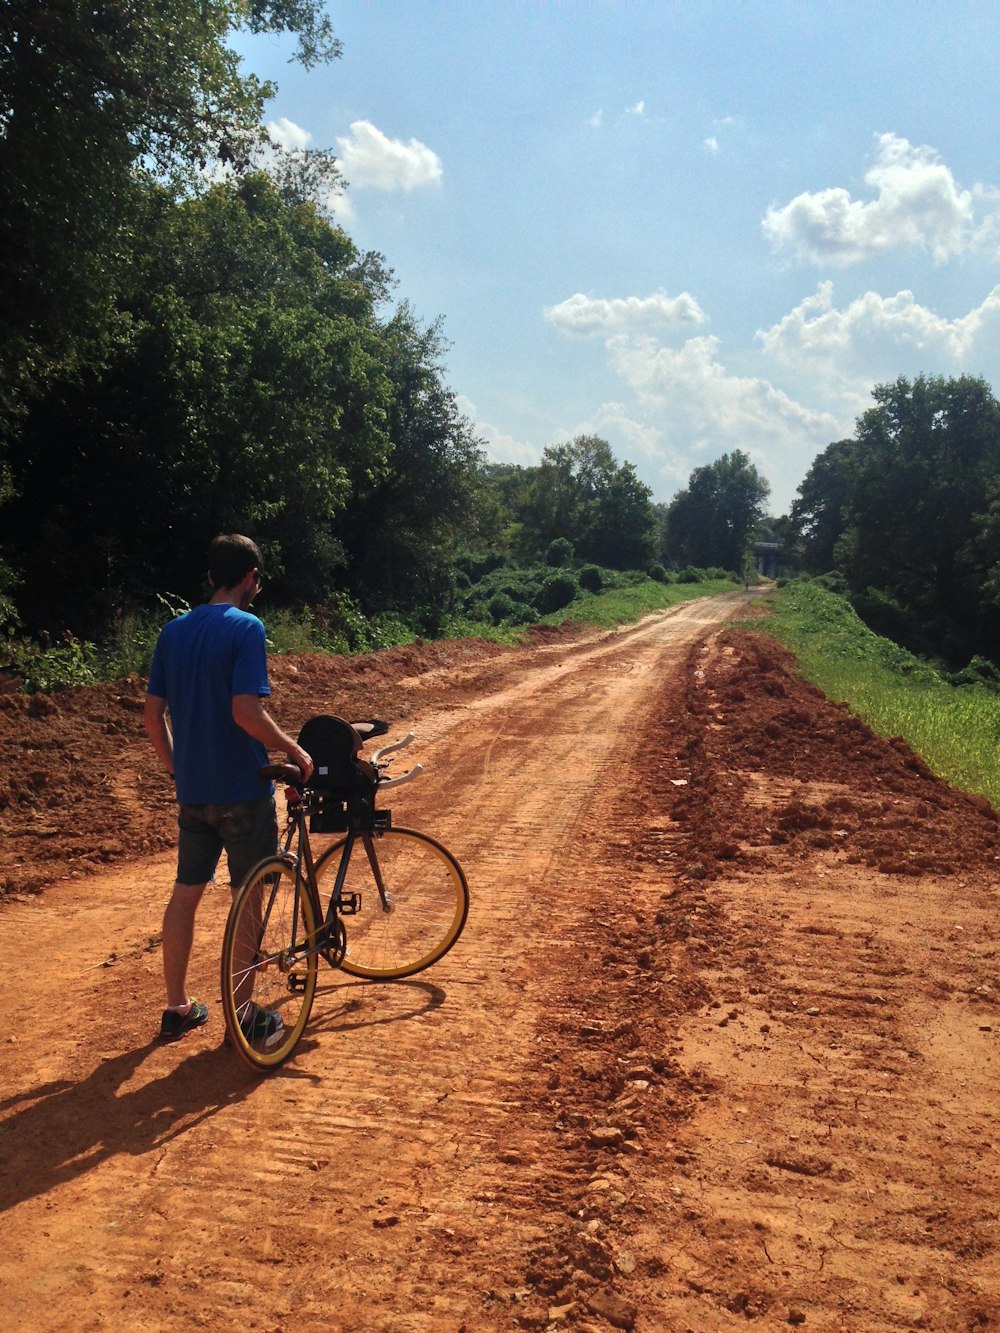 man standing and holding road bike on dirt road near trees